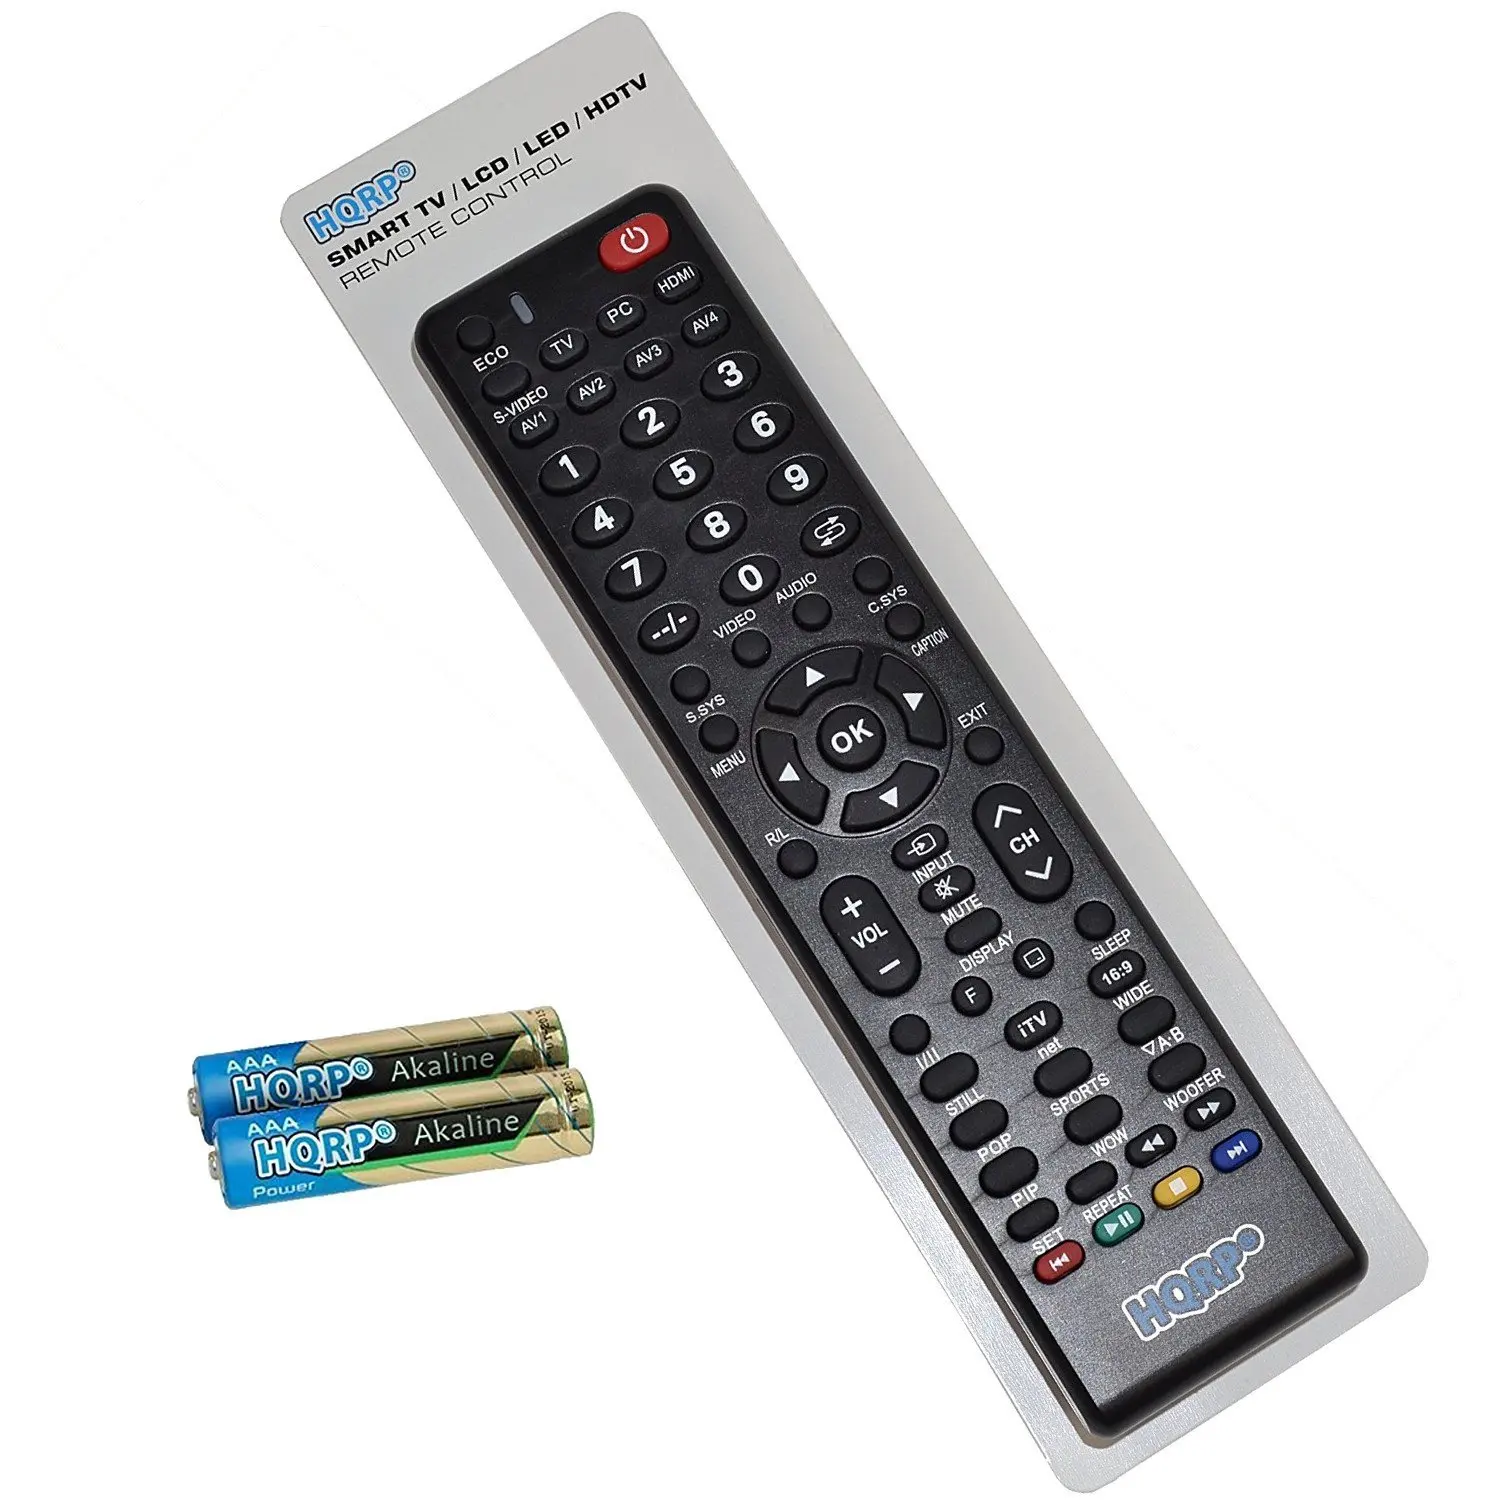 anycommand universal ac remote control manual